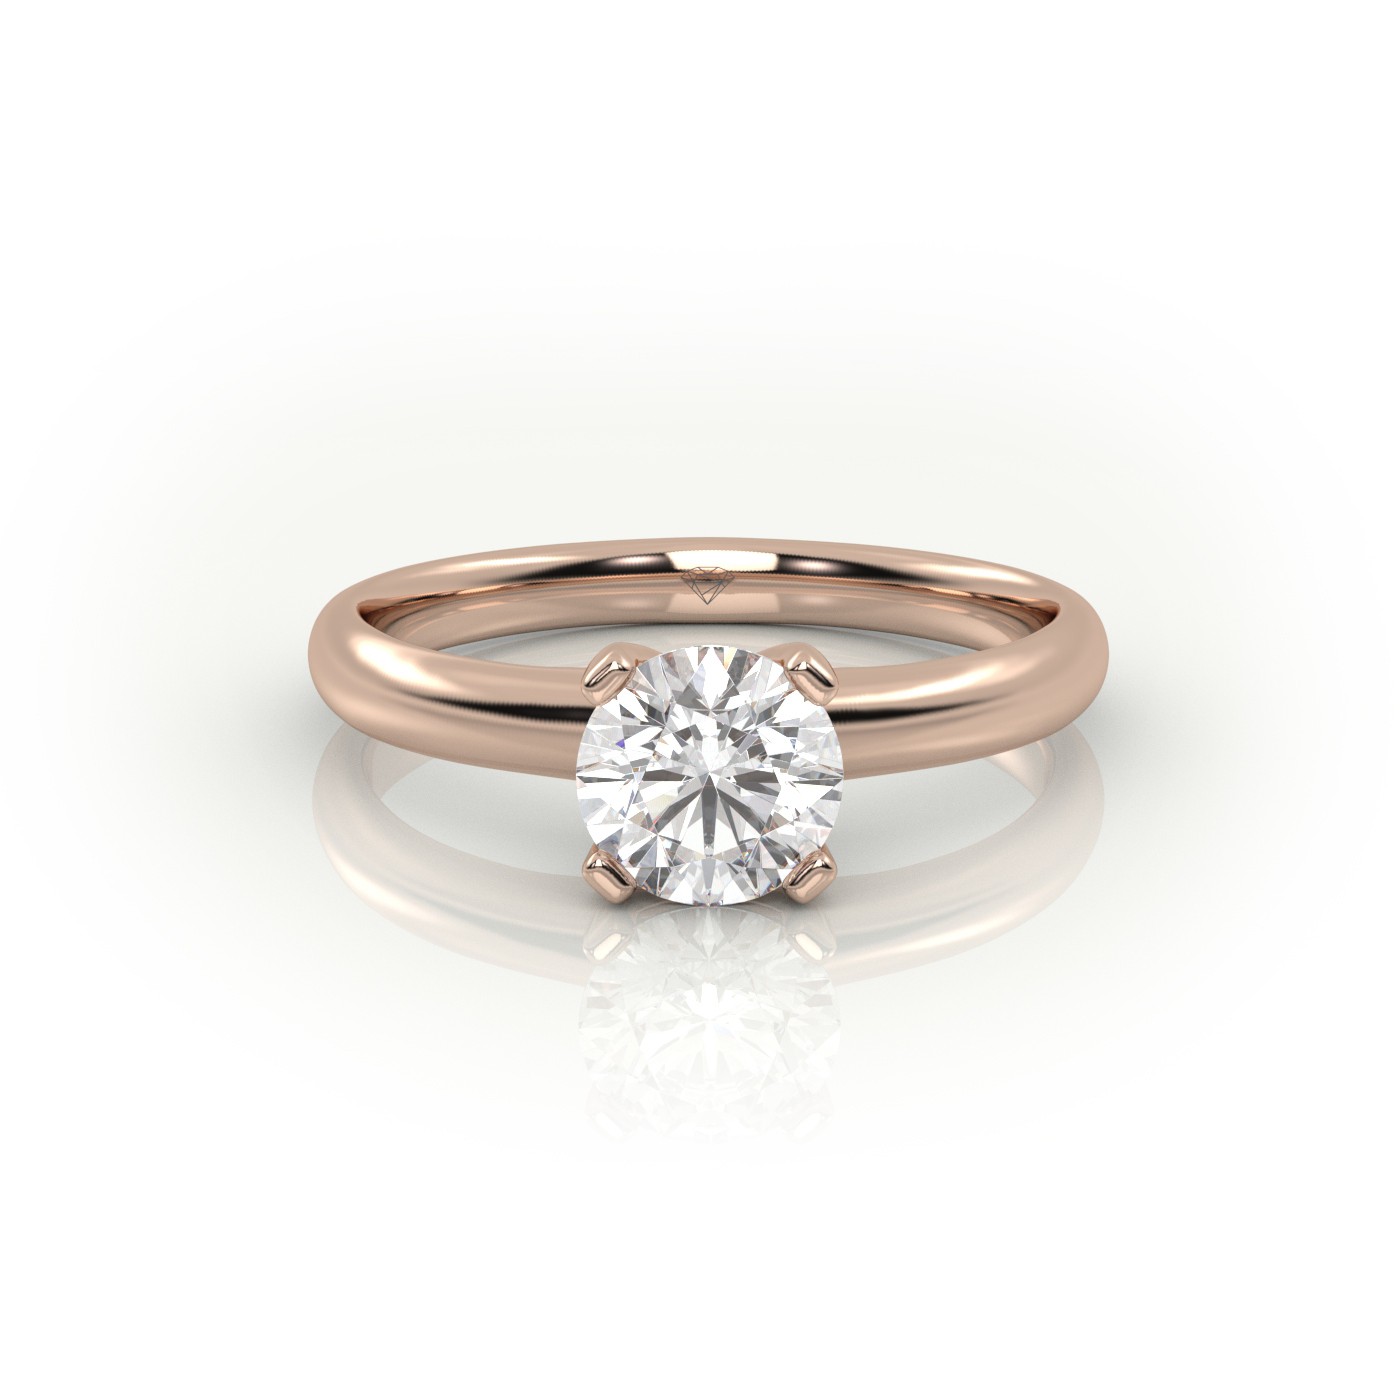 18K ROSE GOLD ROUND CUT 4 PRONGS SOLITAIRE ENGAGEMENT RING